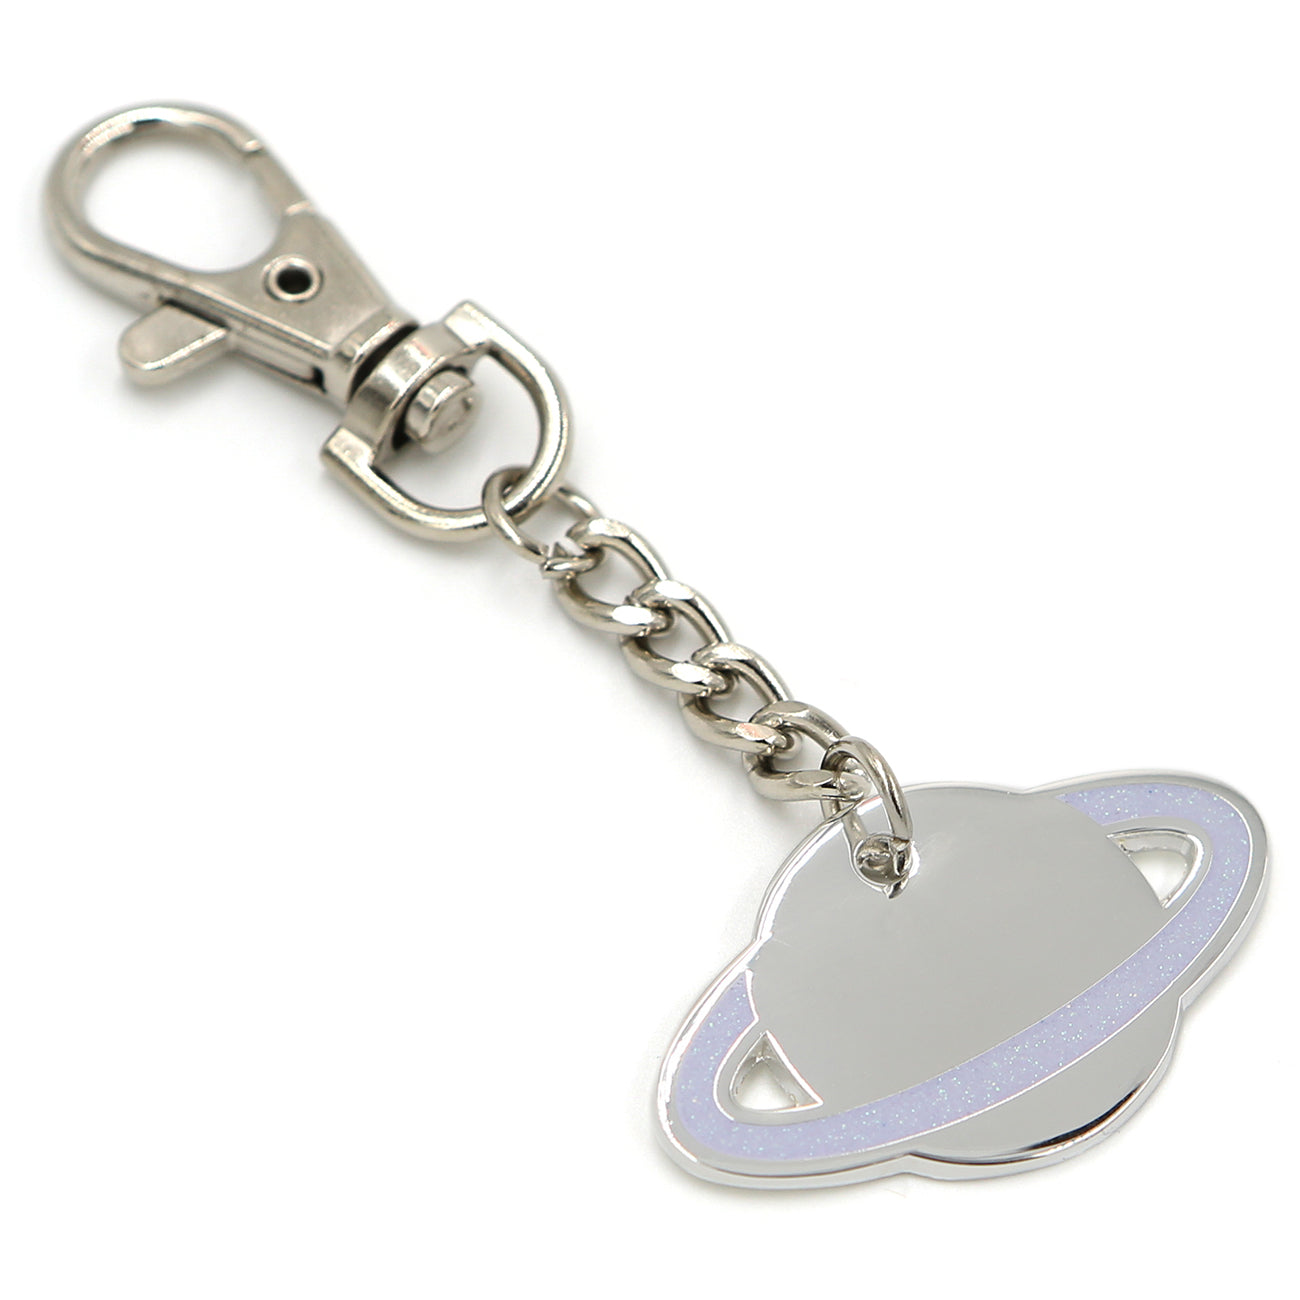 Slanted view of Silver glitter planet keychain charm with lobster clasp on white background.